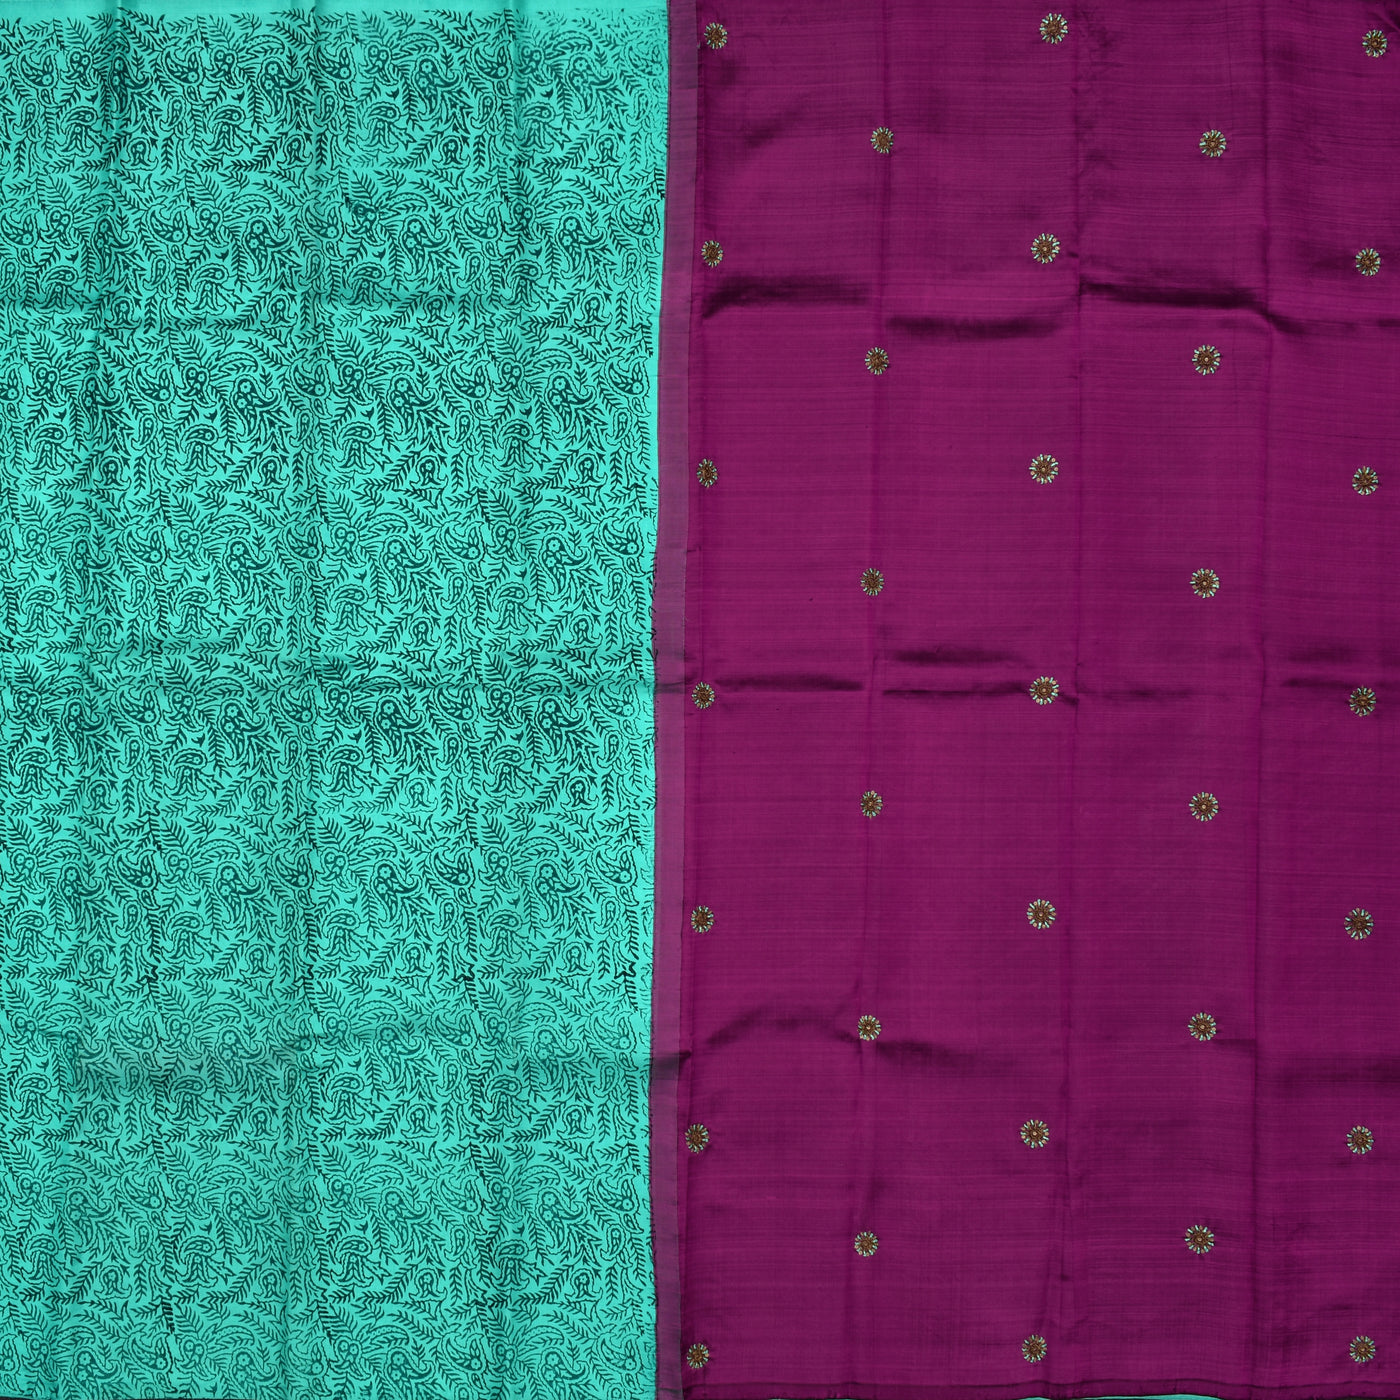 Turquoise Blue Printed Kanchi Silk Saree With Purple Blouse